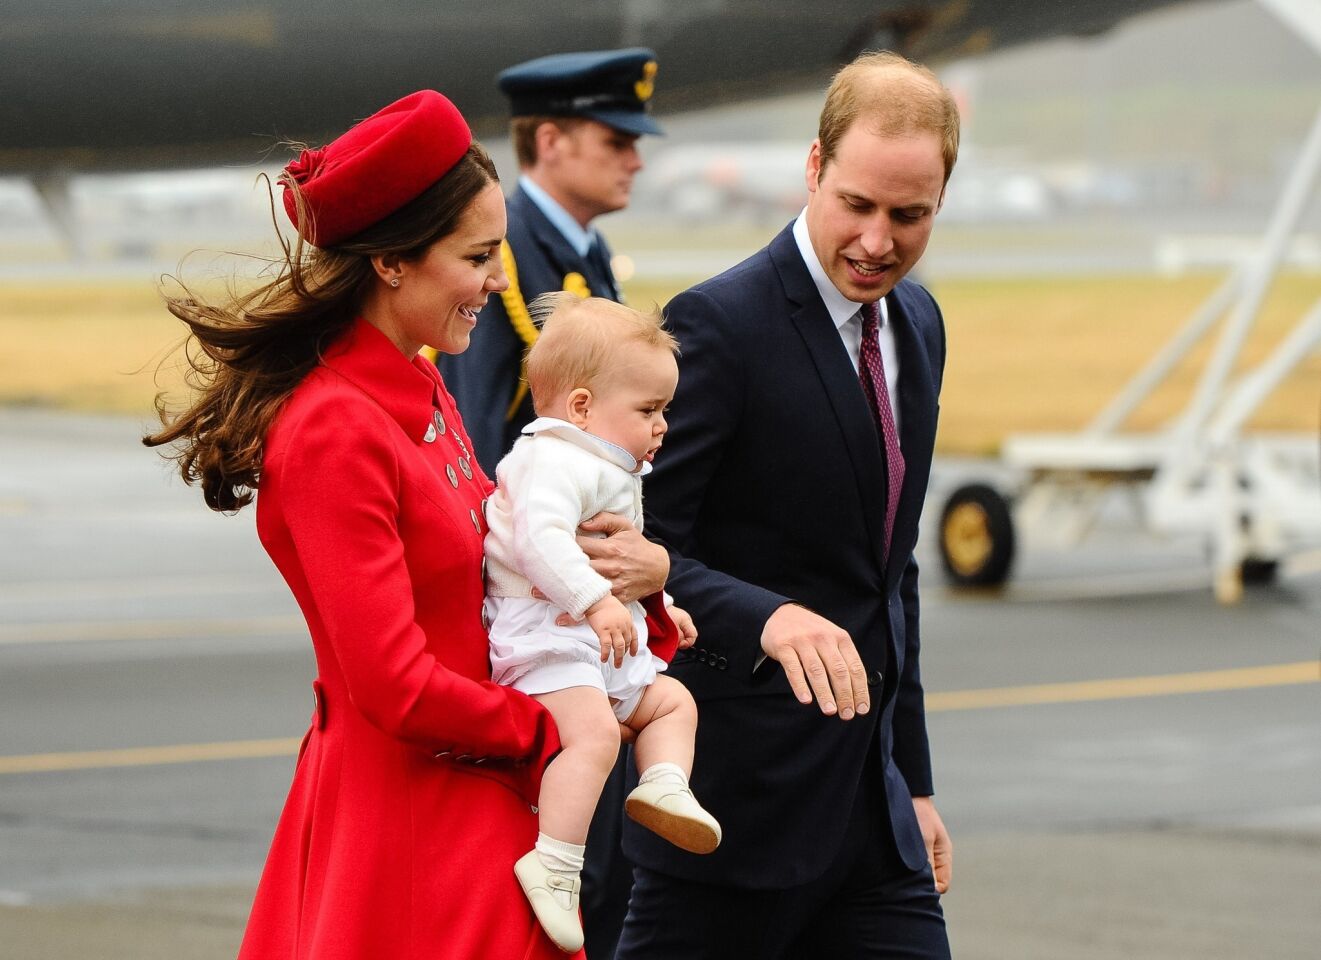 The royals make their way across the tarmac in New Zealand to begin their three-week tour of that country and Australia.